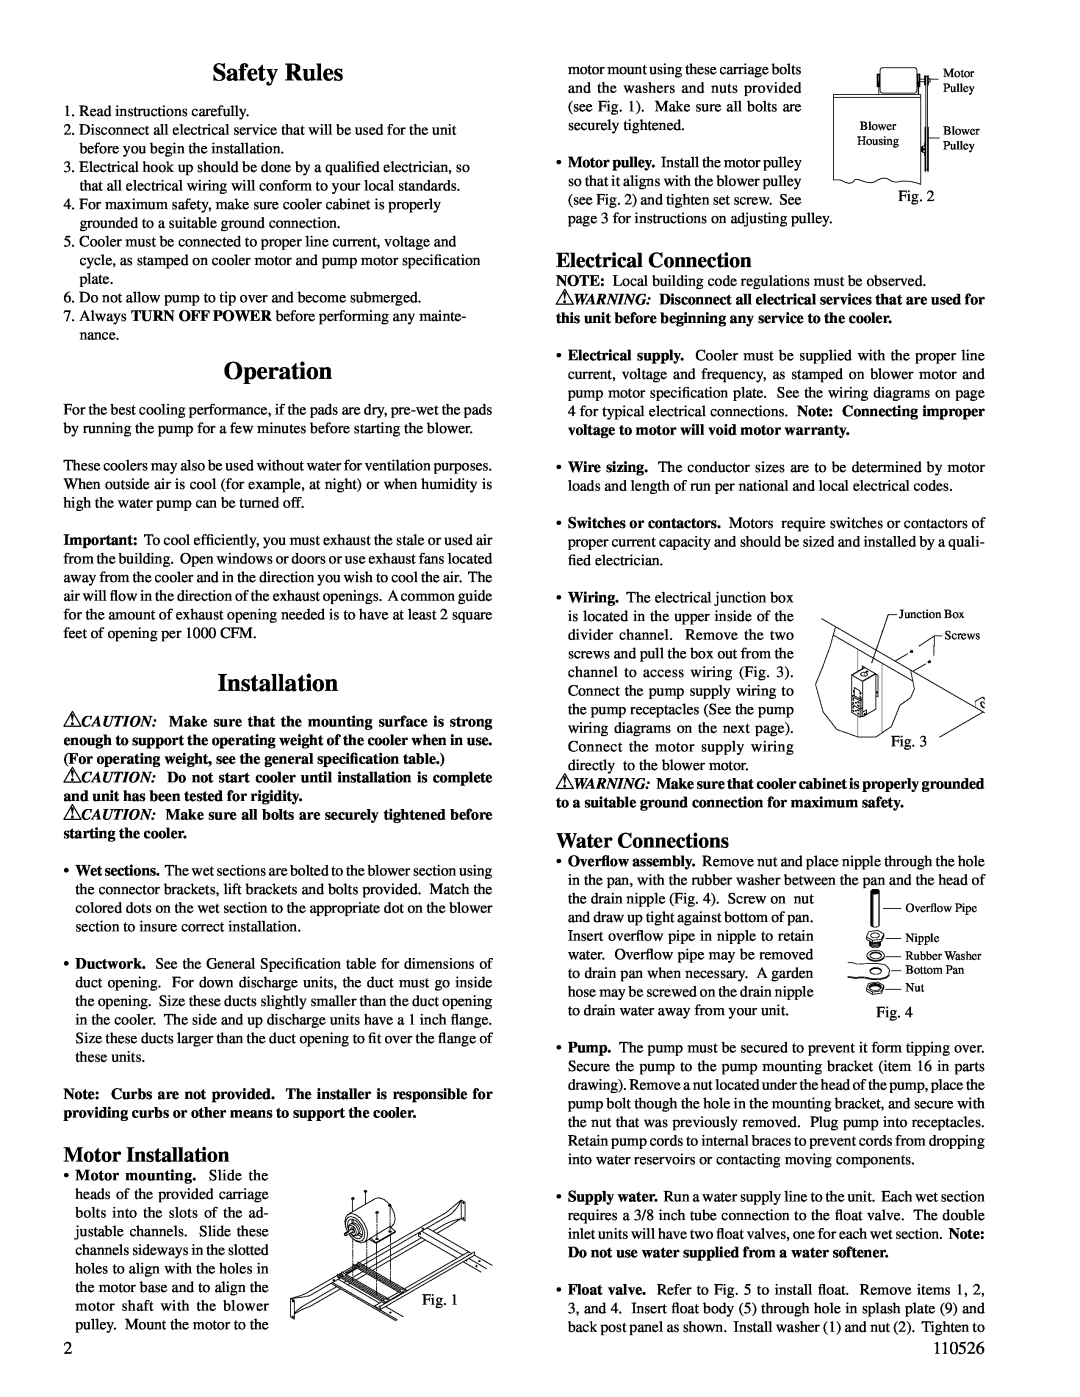 Essick Air AS100, SAD150 Safety Rules, Operation, Motor Installation, Electrical Connection, Water Connections, 110526 